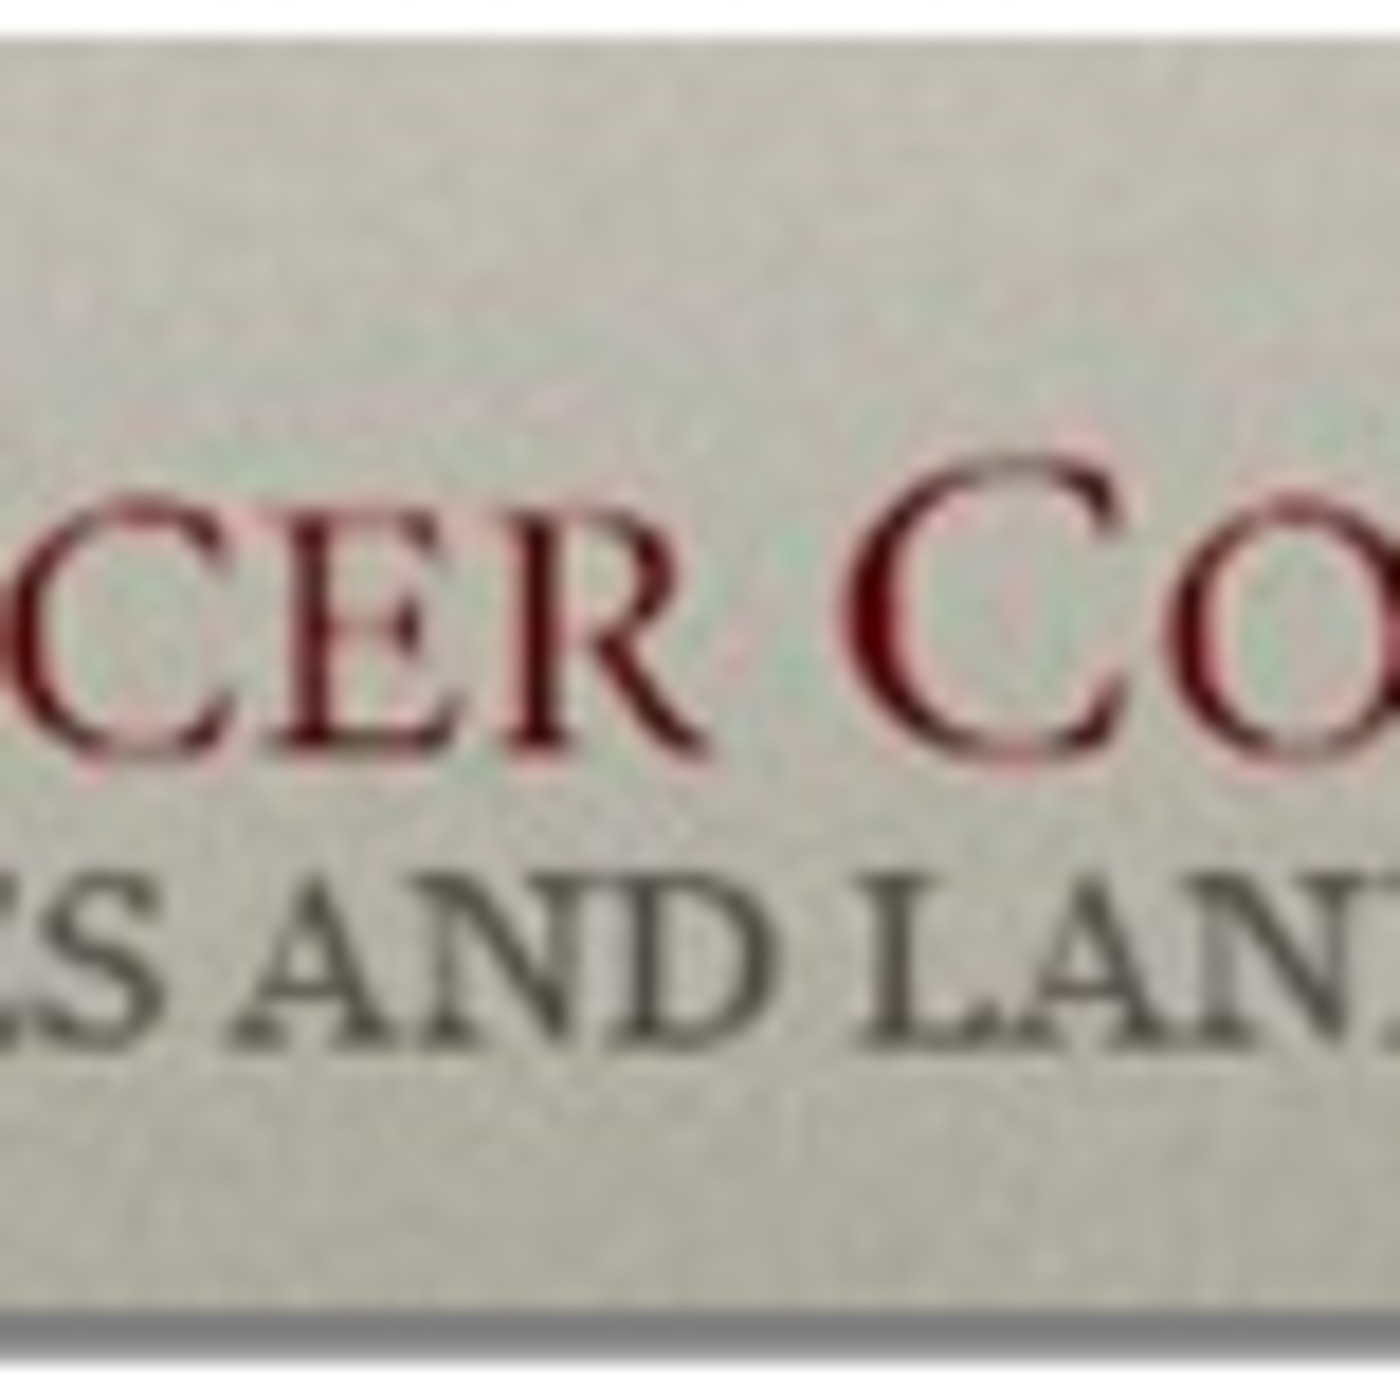 Placer County Homes and Land Podcast